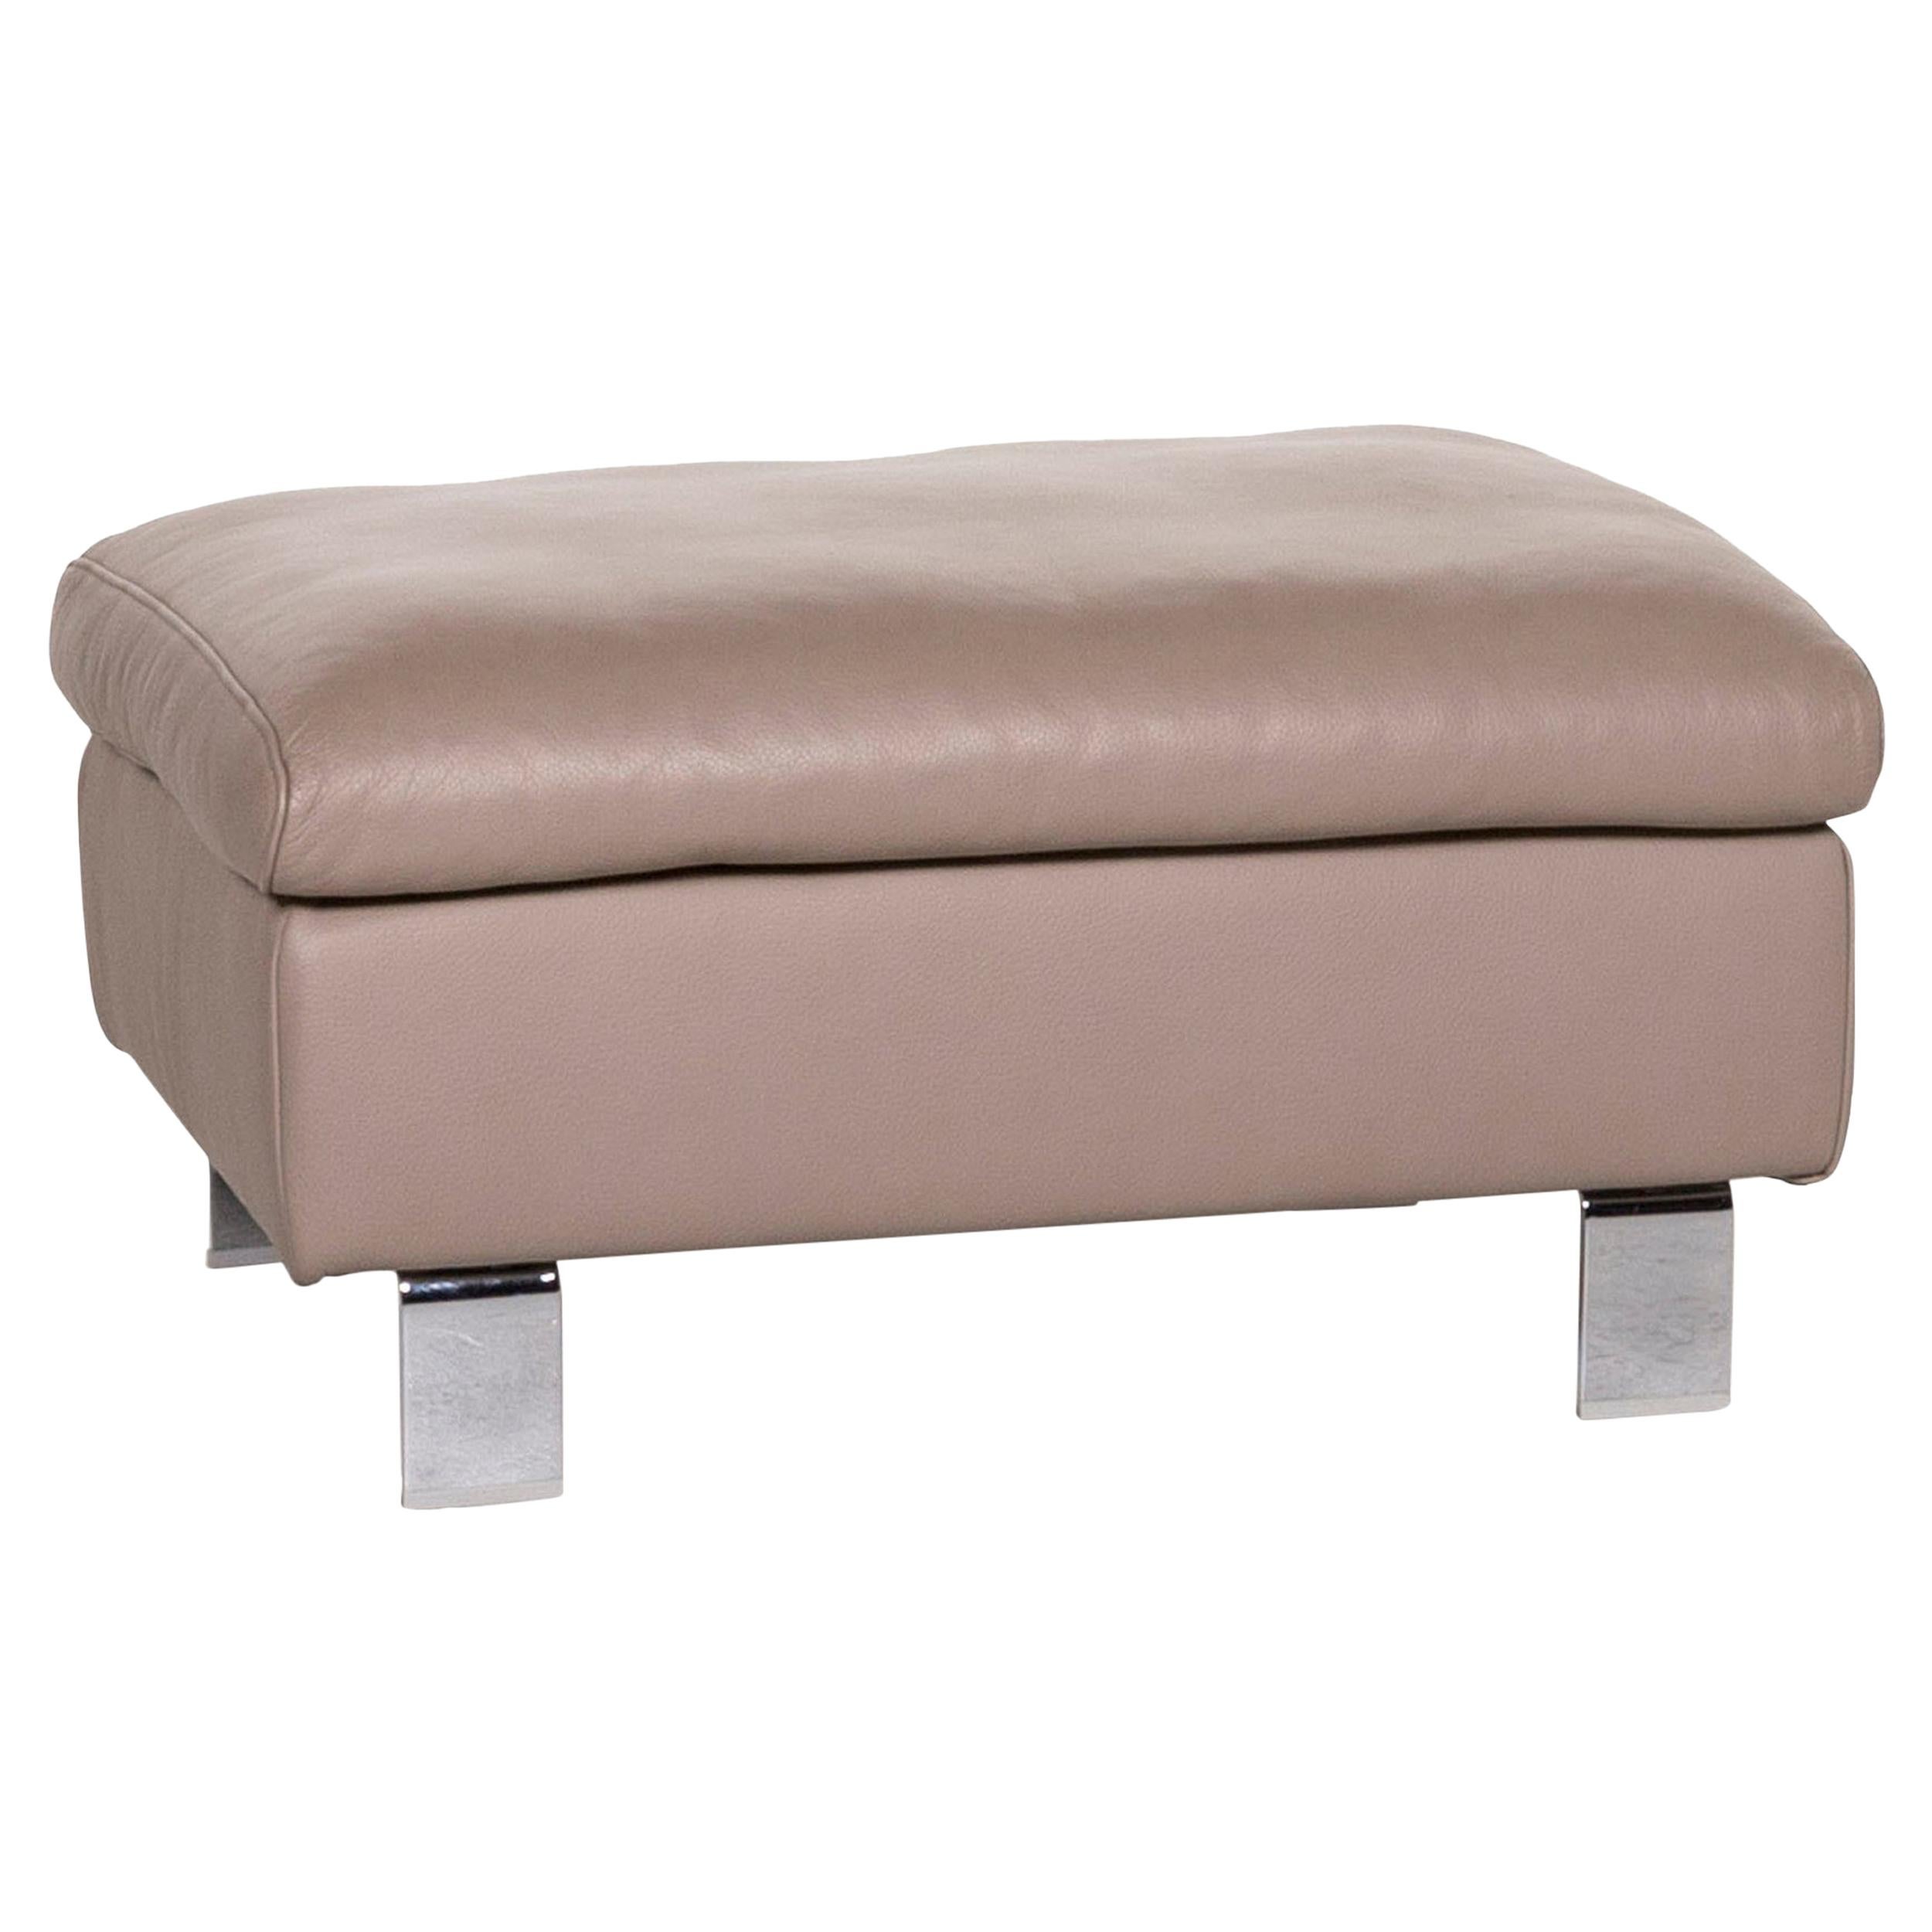 Ewald Schillig Leather Stool Brown Gray Beige Cappucino Ottoman For Sale